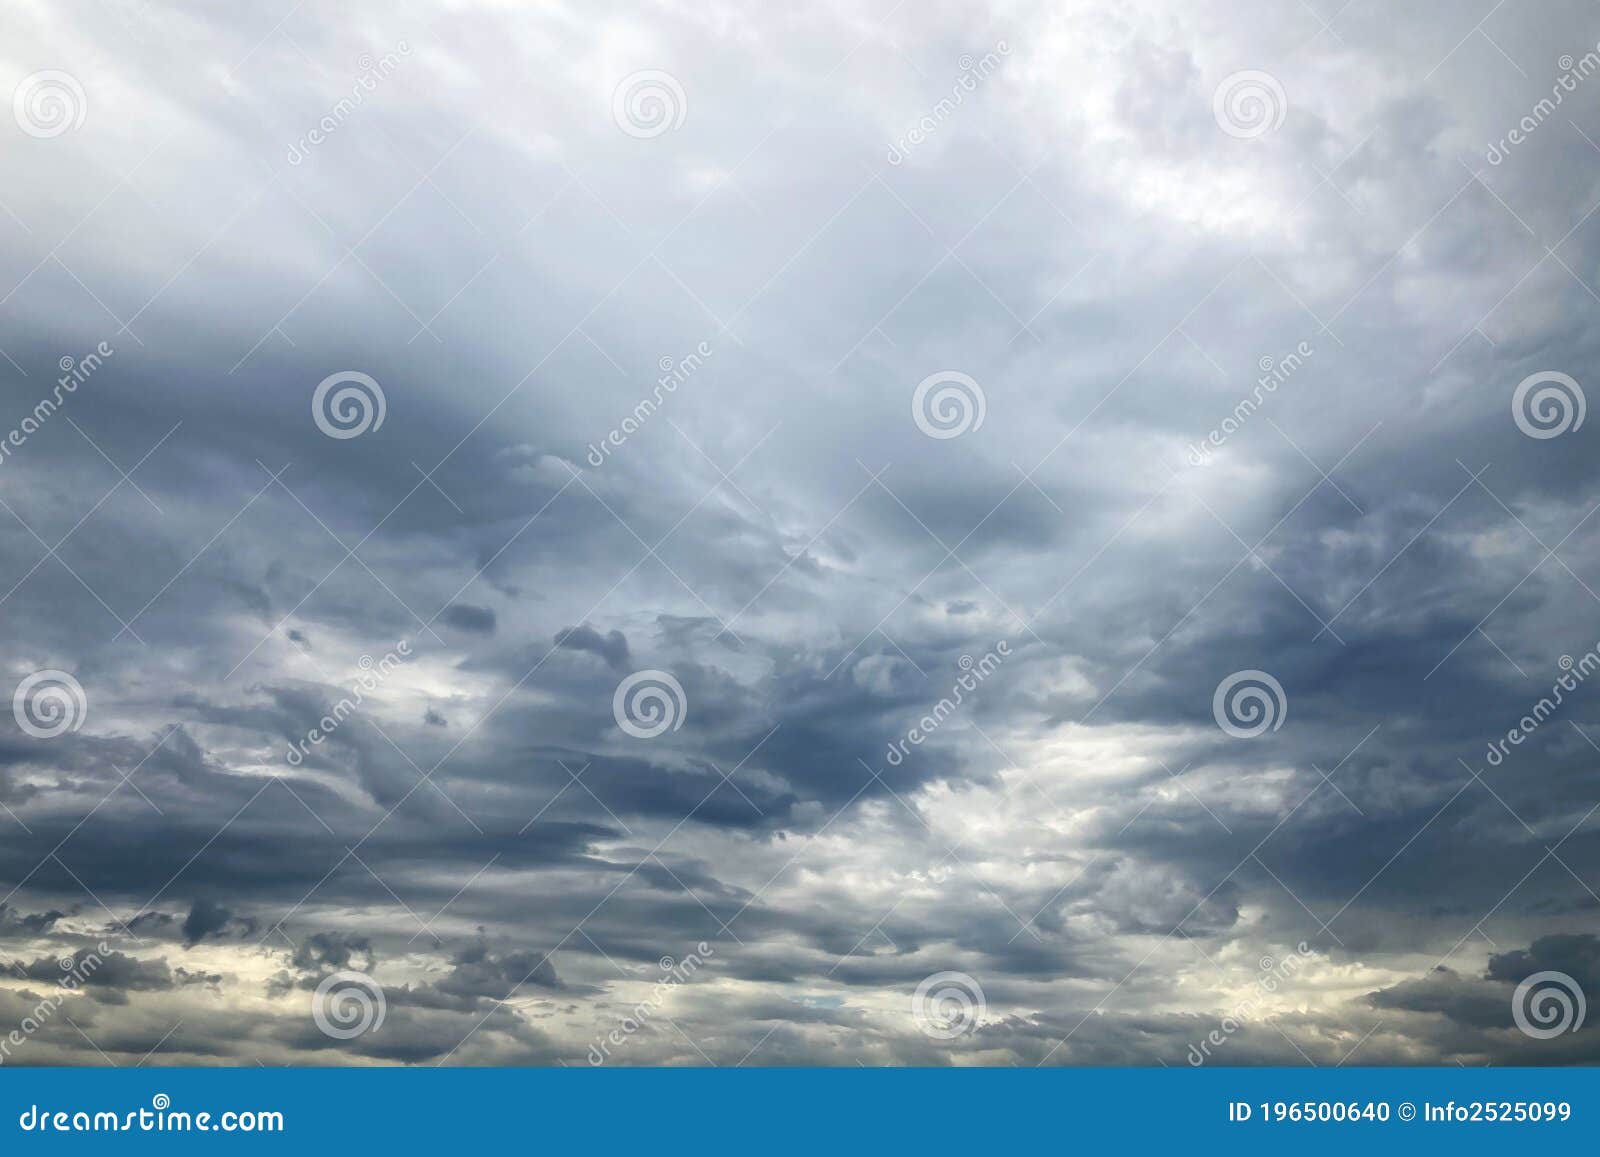 Clouds in the Sky of a Rainy Day Stock Photo - Image of outdoor, bright:  196500640